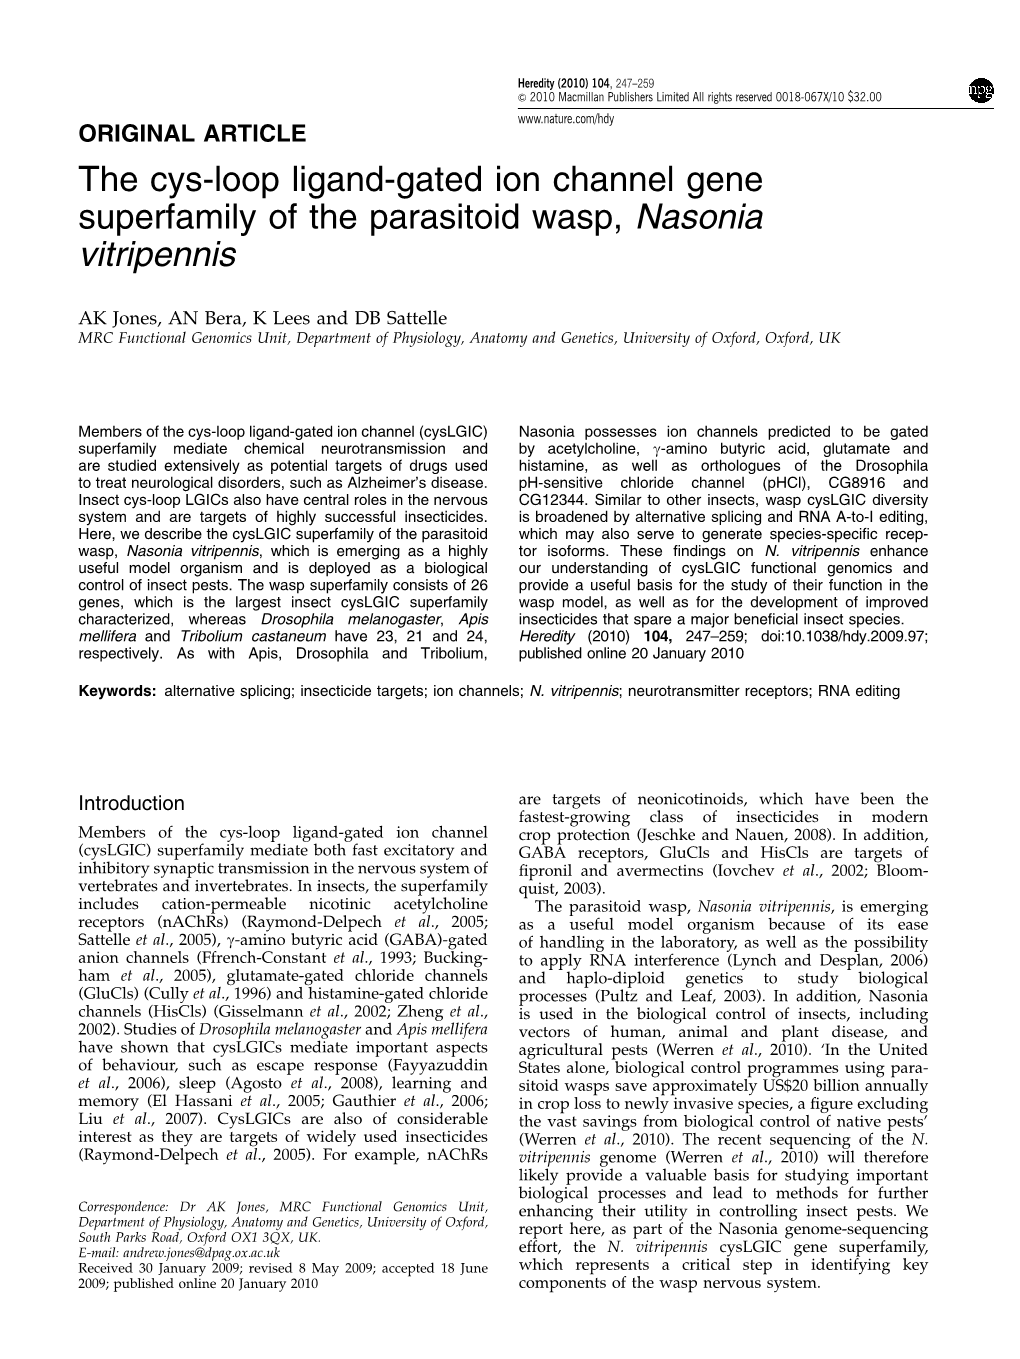 The Cys-Loop Ligand-Gated Ion Channel Gene Superfamily of the Parasitoid Wasp, Nasonia Vitripennis